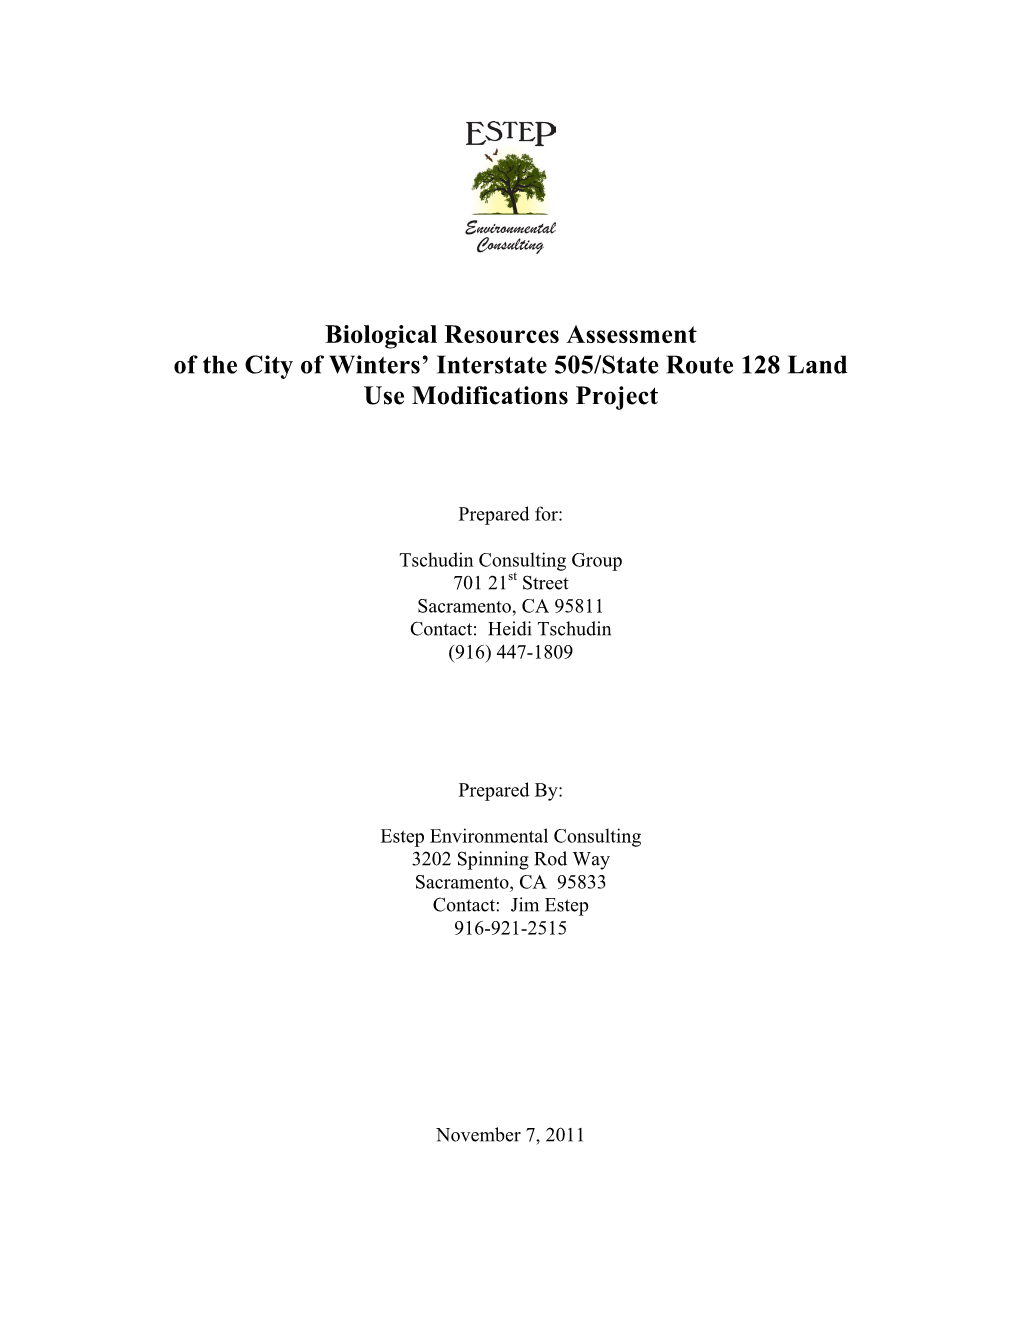 Biological Resources Assessment of the City of Winters' Interstate 505